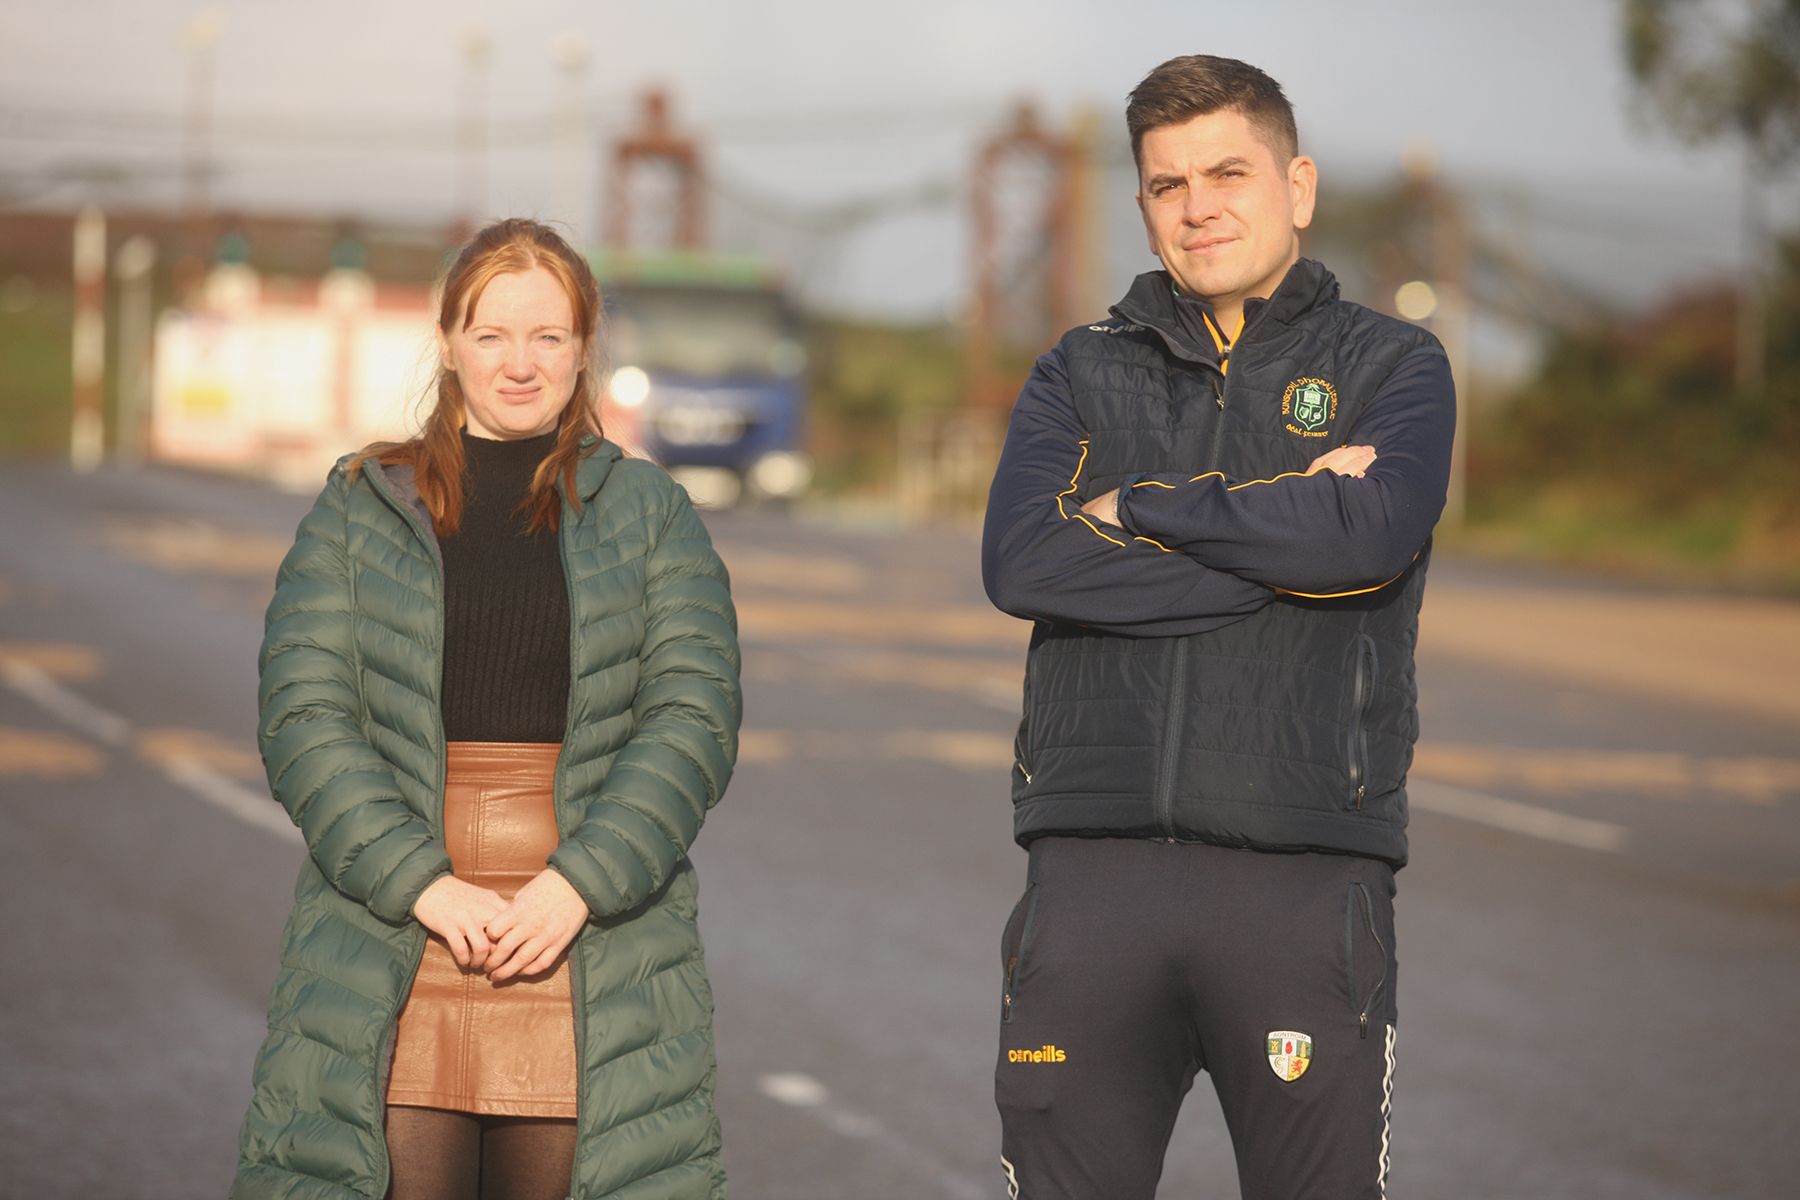 STENCH: Local resident, Mairead Connolly and Cllr Danny Baker have hit out at the decision to extend the use of Mullaghglass Landfill for domestic waste